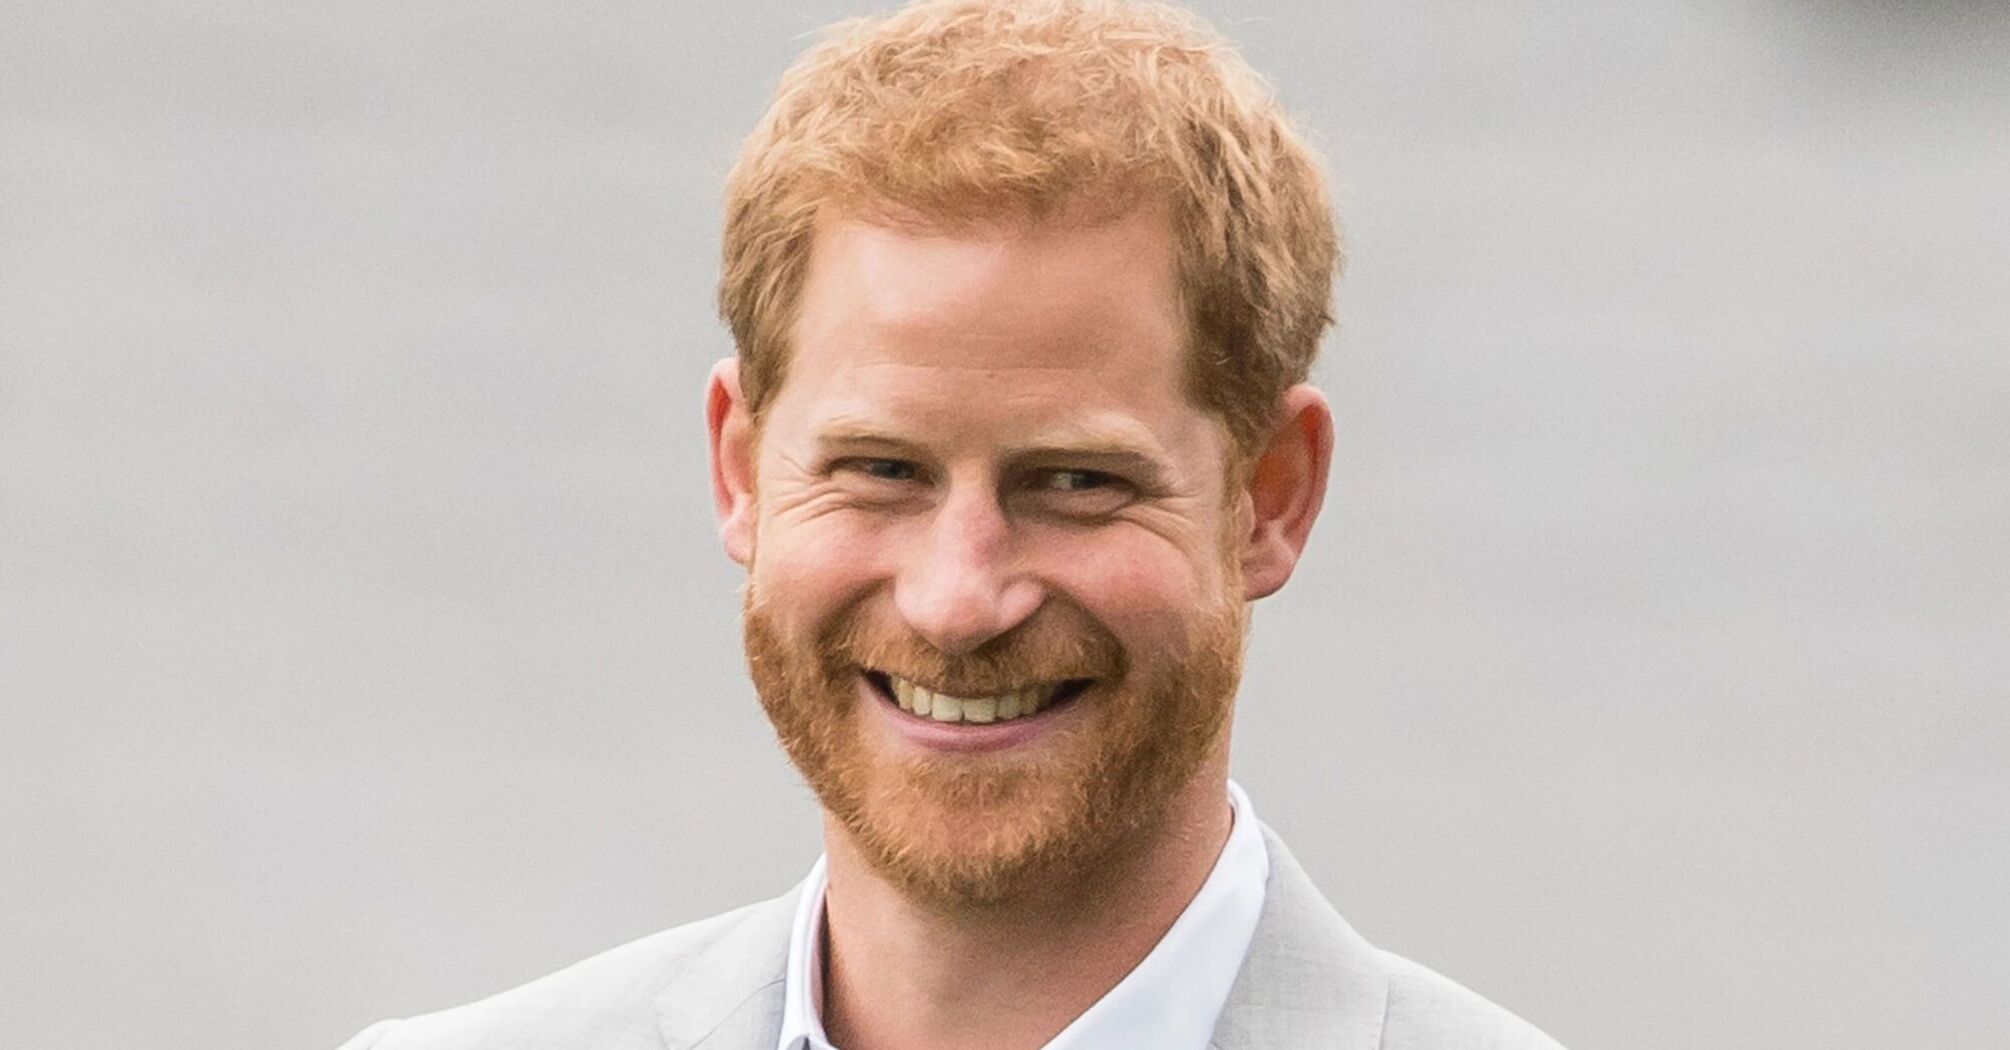 5 funny facts about Prince Harry